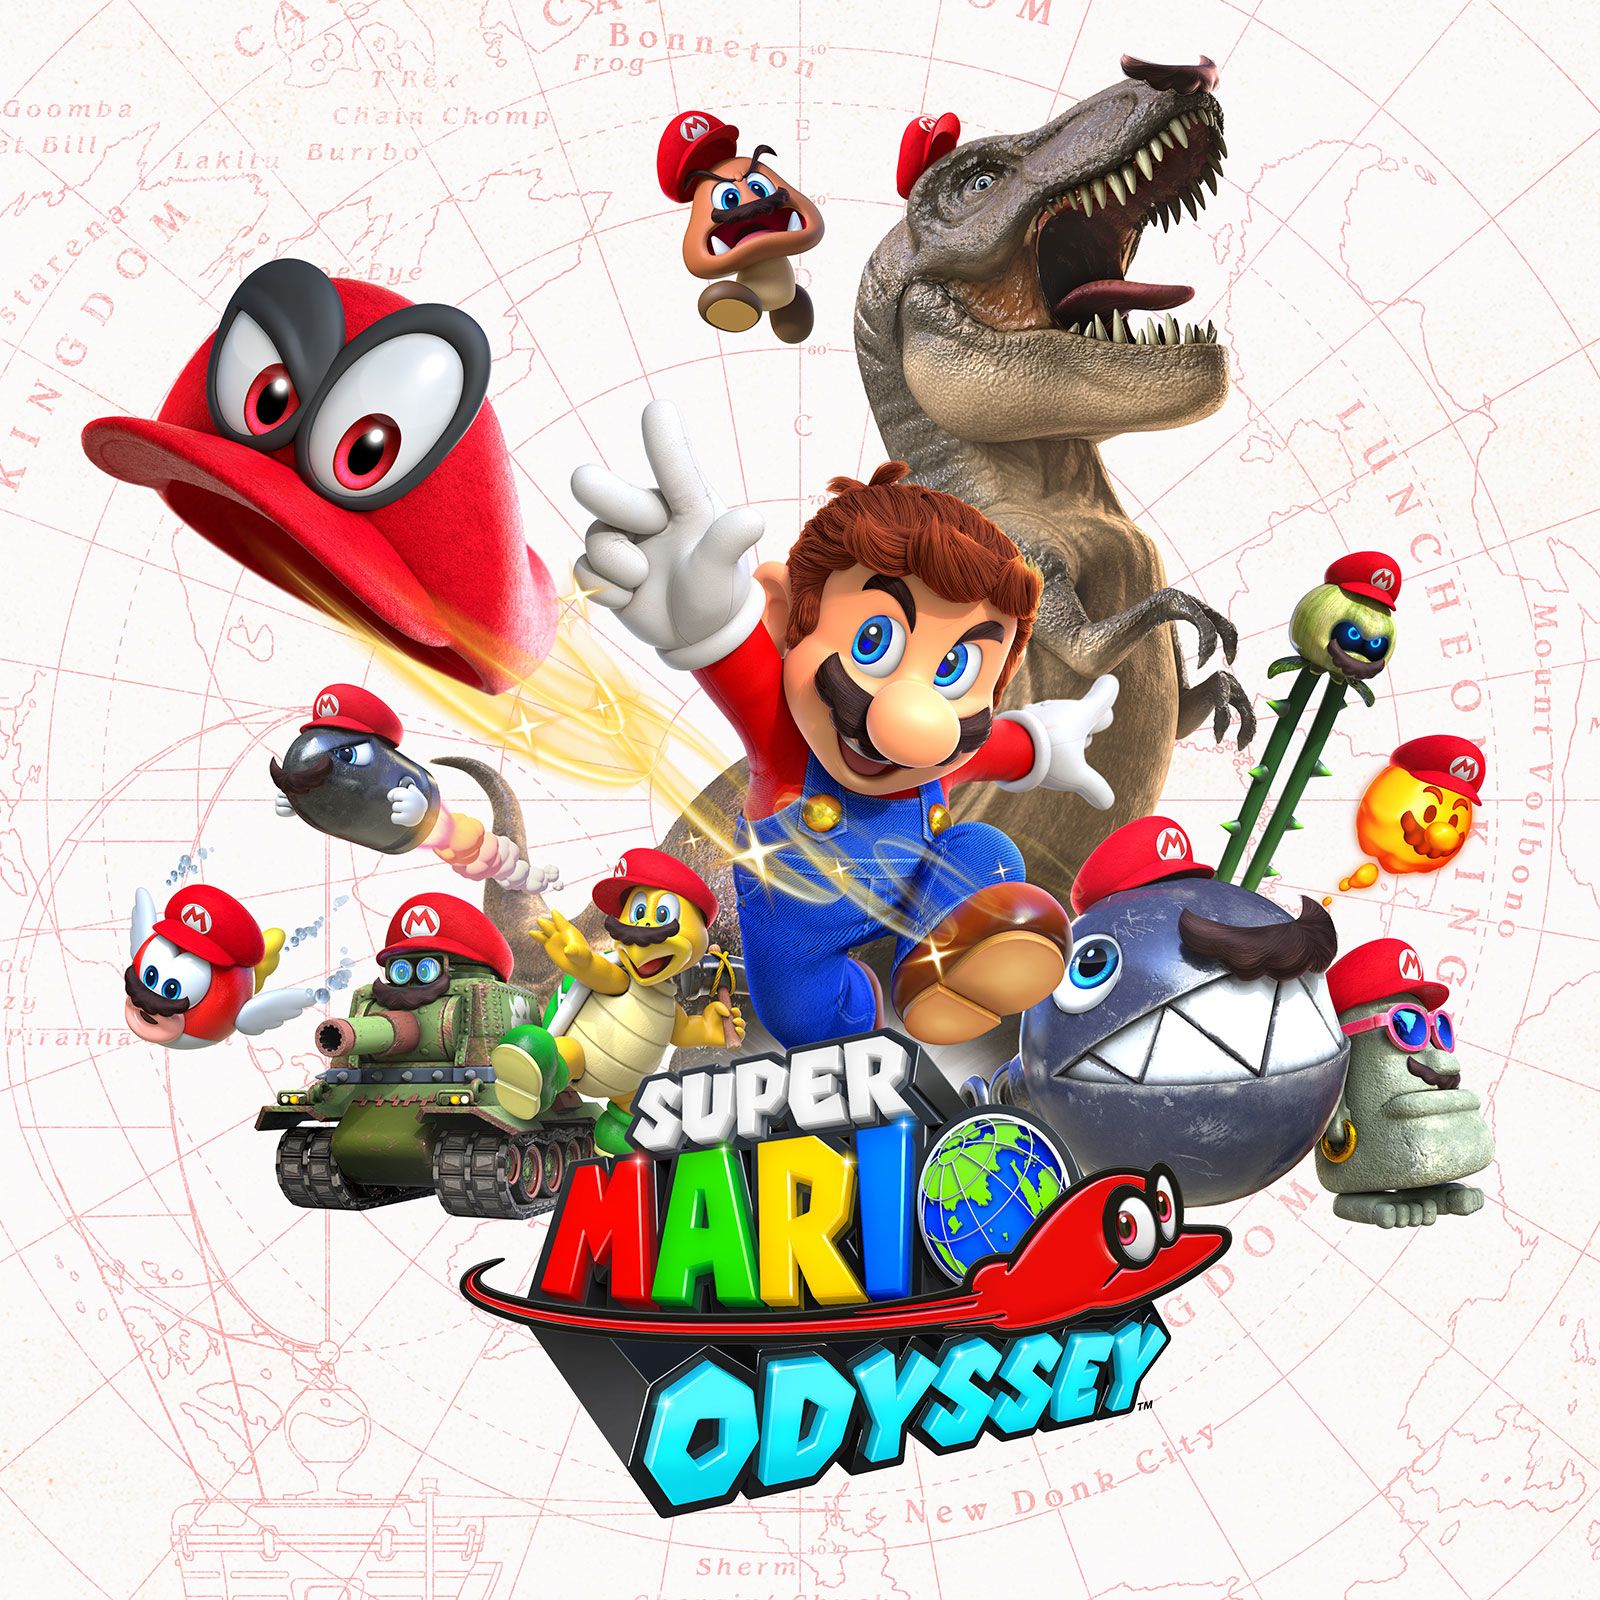 Where Is The Follow-Up To Super Mario Odyssey?